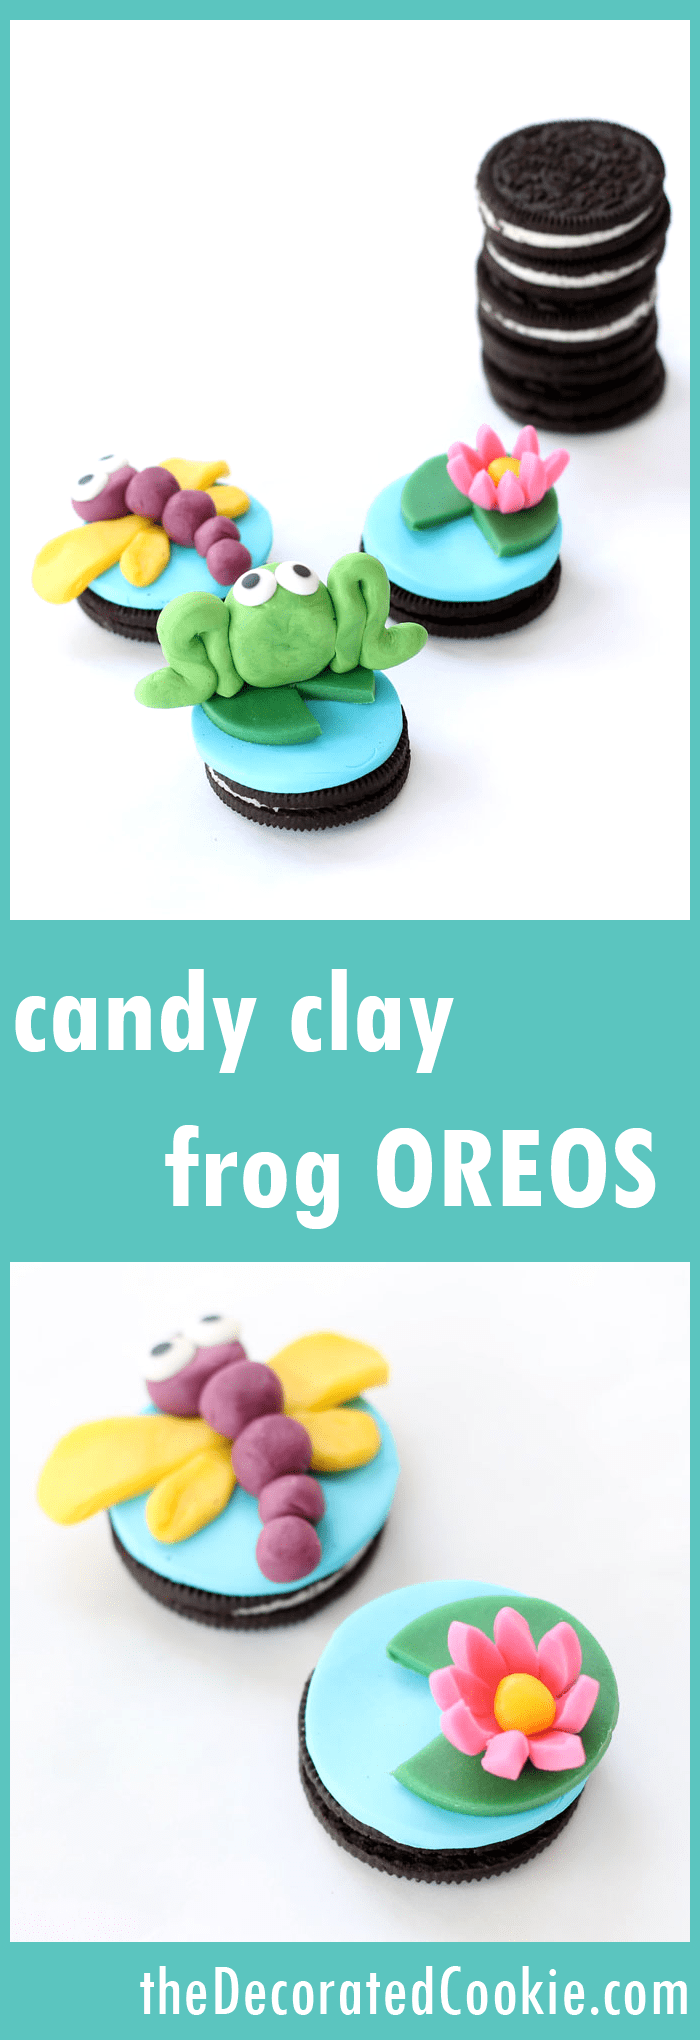 how to make candy clay and frog Oreos 